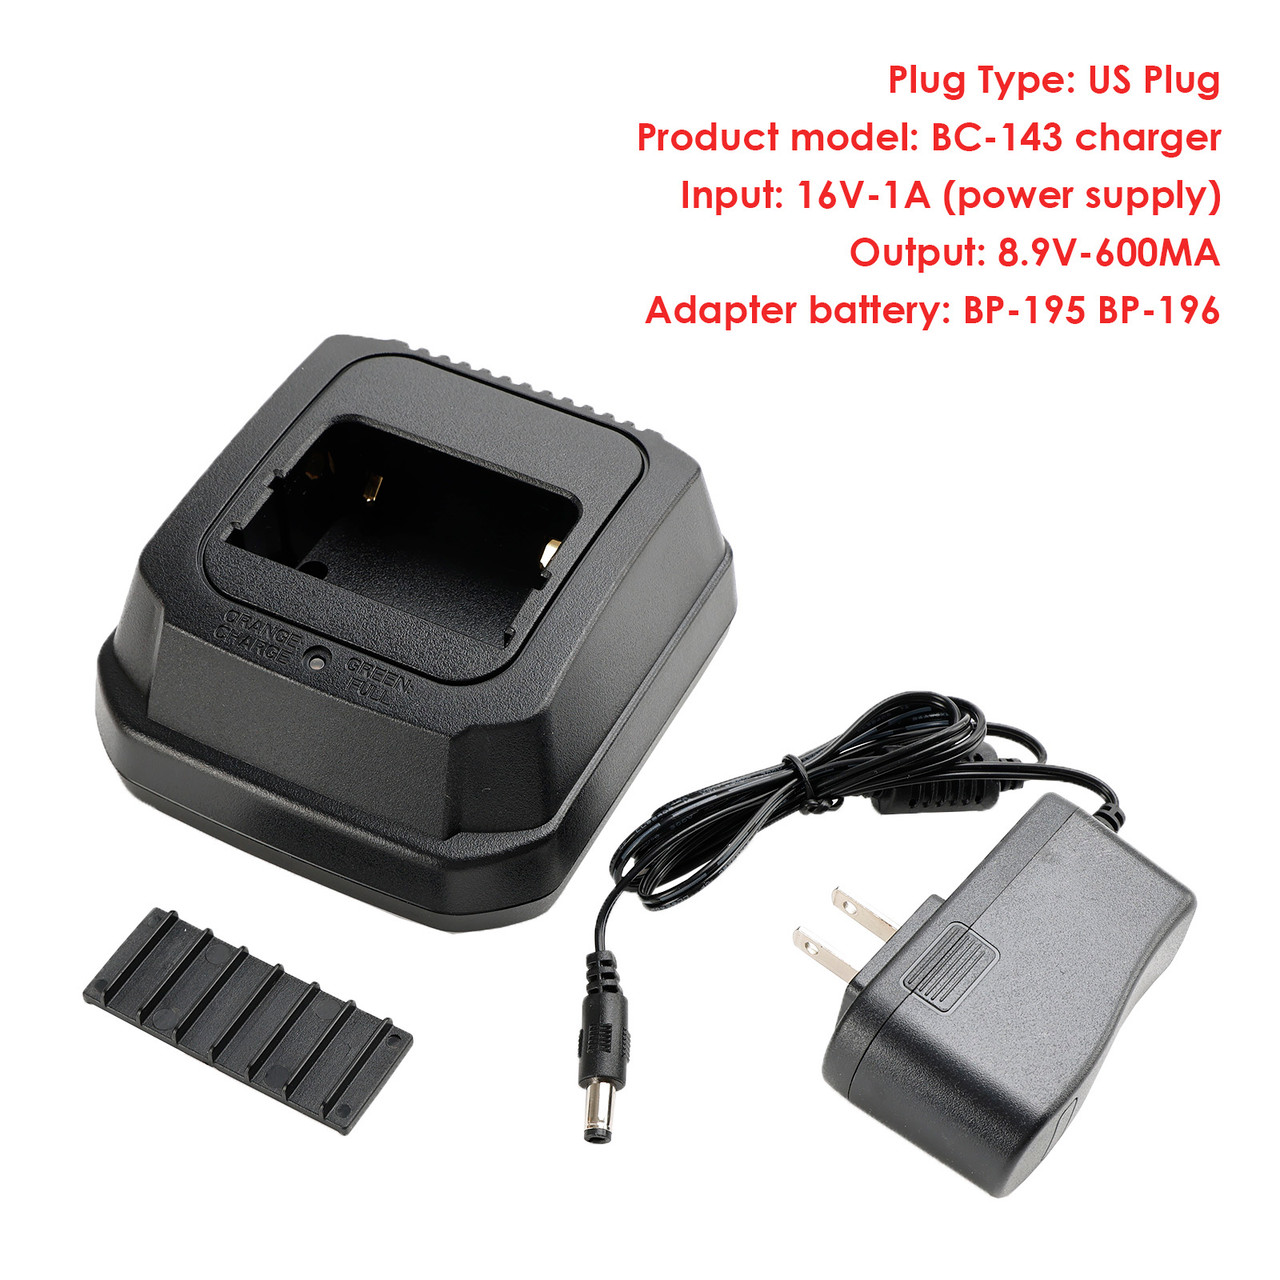 BC-143 Charger BP-196 Battery Fast Rapid Dock for ICOM IC-T22 T42 T2E F3 US Plug